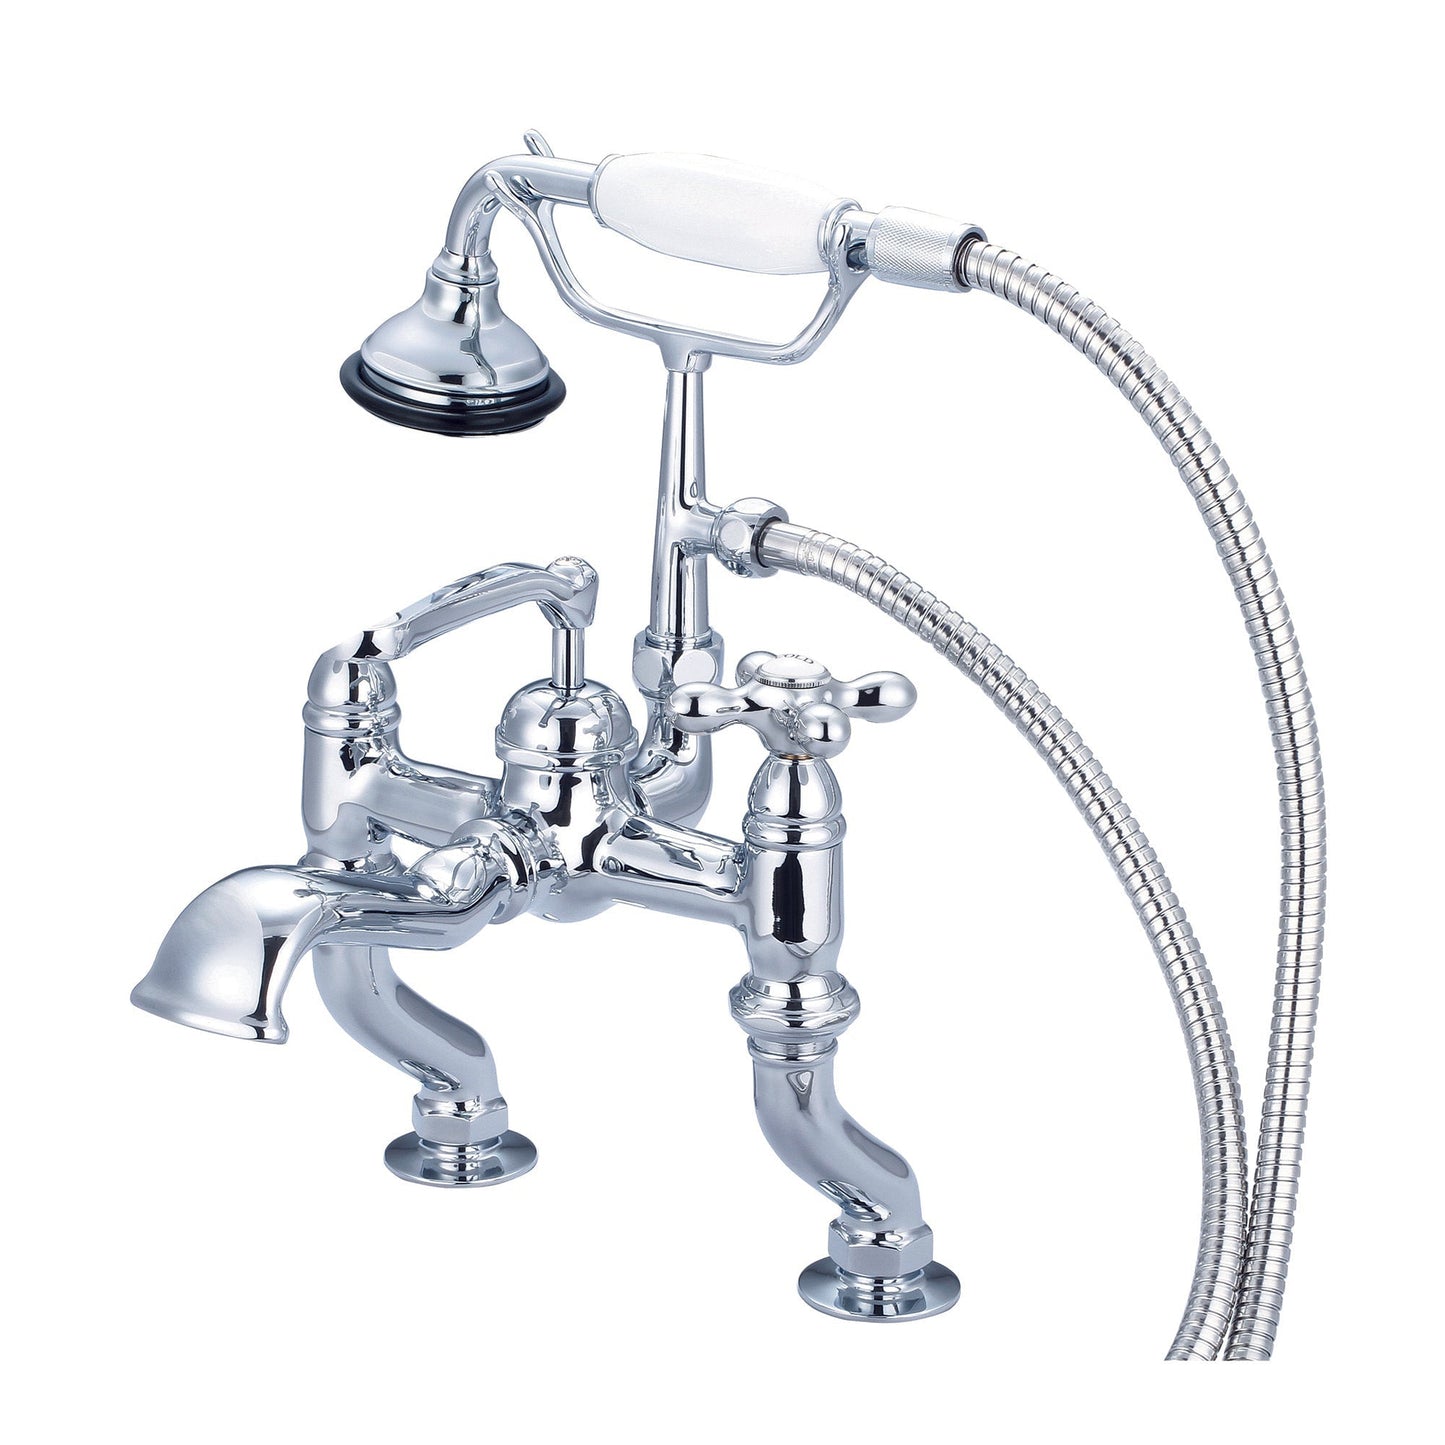 Water Creation Vintage Classic Adjustable Center Deck Mount Tub F6-0004 3.25" Silver Solid Brass Faucet With Handheld Shower And Metal Lever Handles, Hot And Cold Labels Included